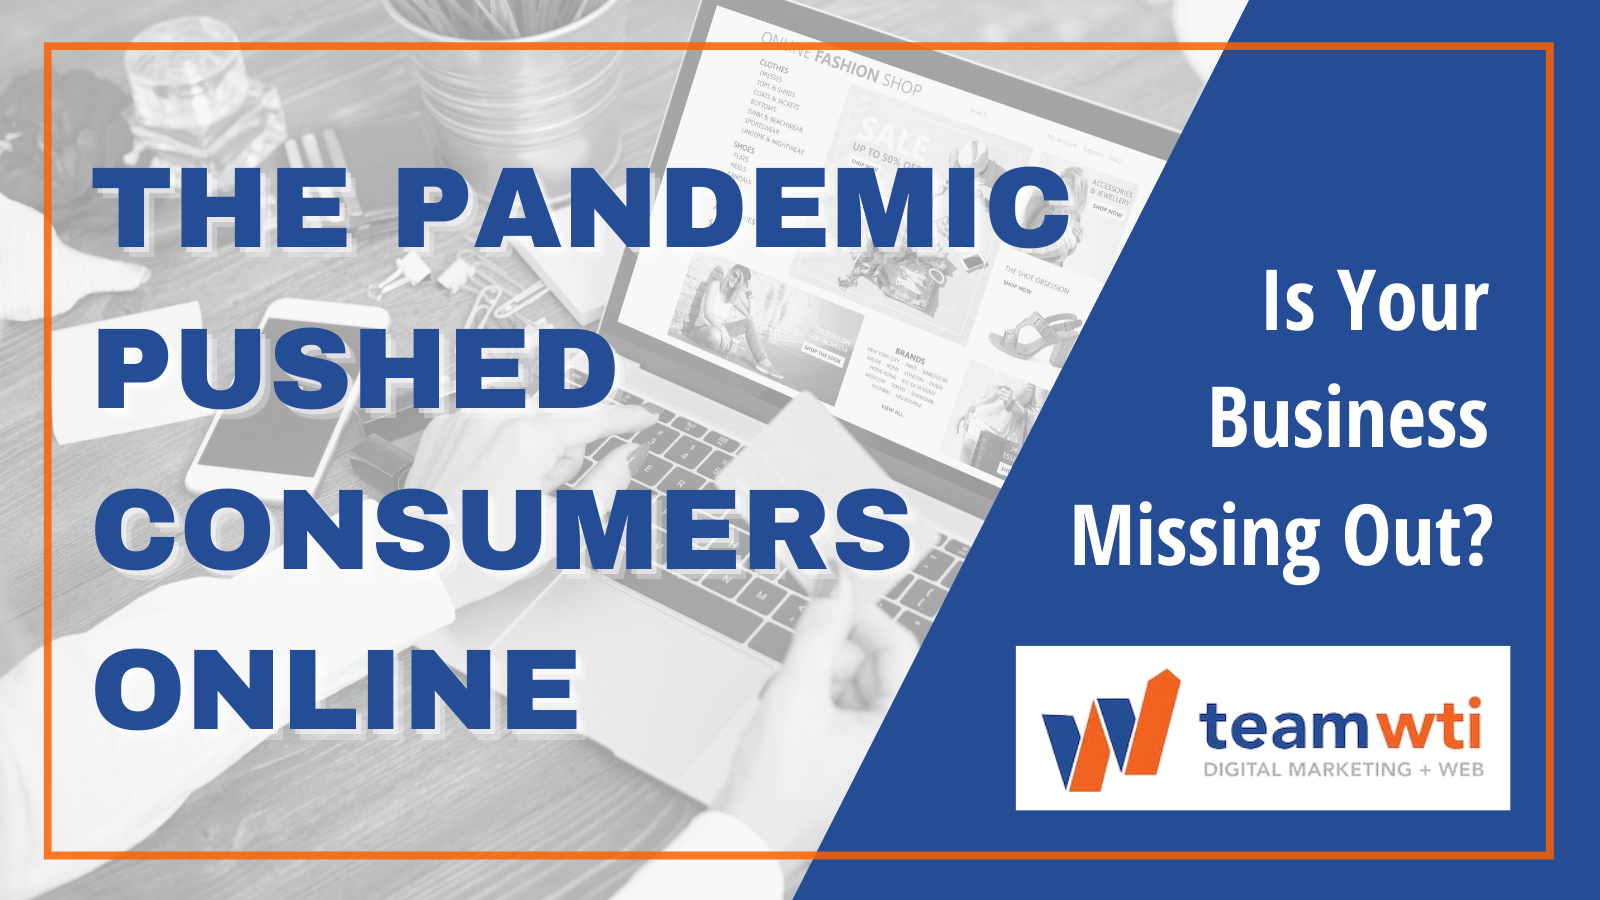 The Pandemic Pushed Consumers Online. Is Your Business Missing Out?